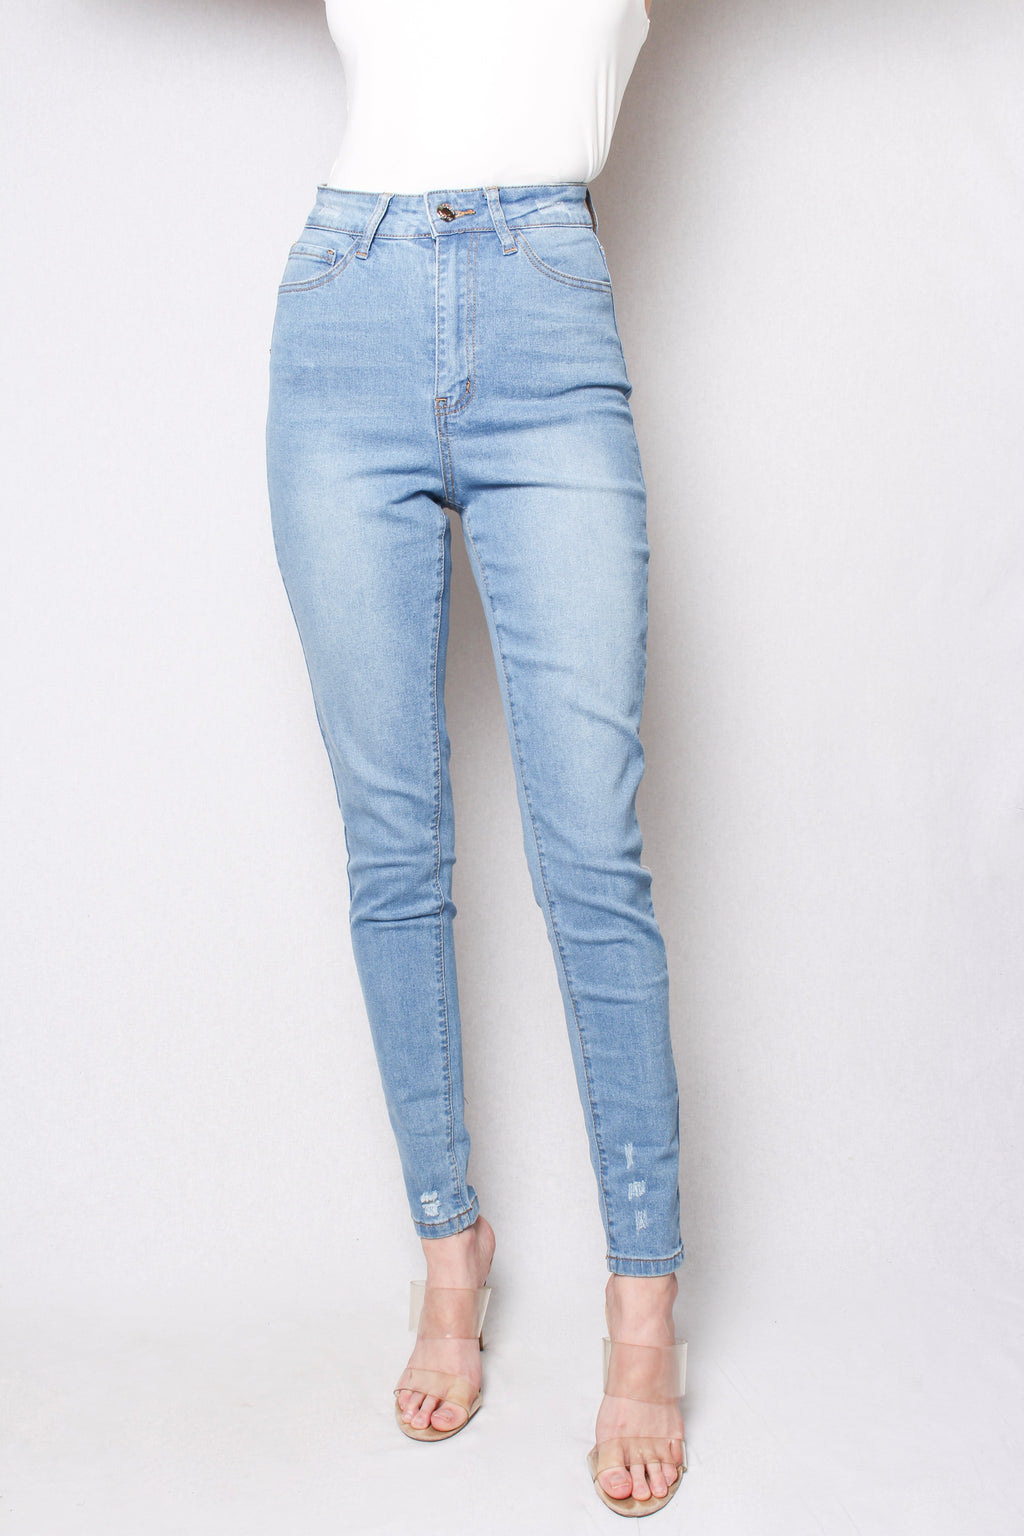 Wholesale Women's Jeans - Wholesale Bootcut - Flare - Skinny & More! – Good  Stuff Apparel